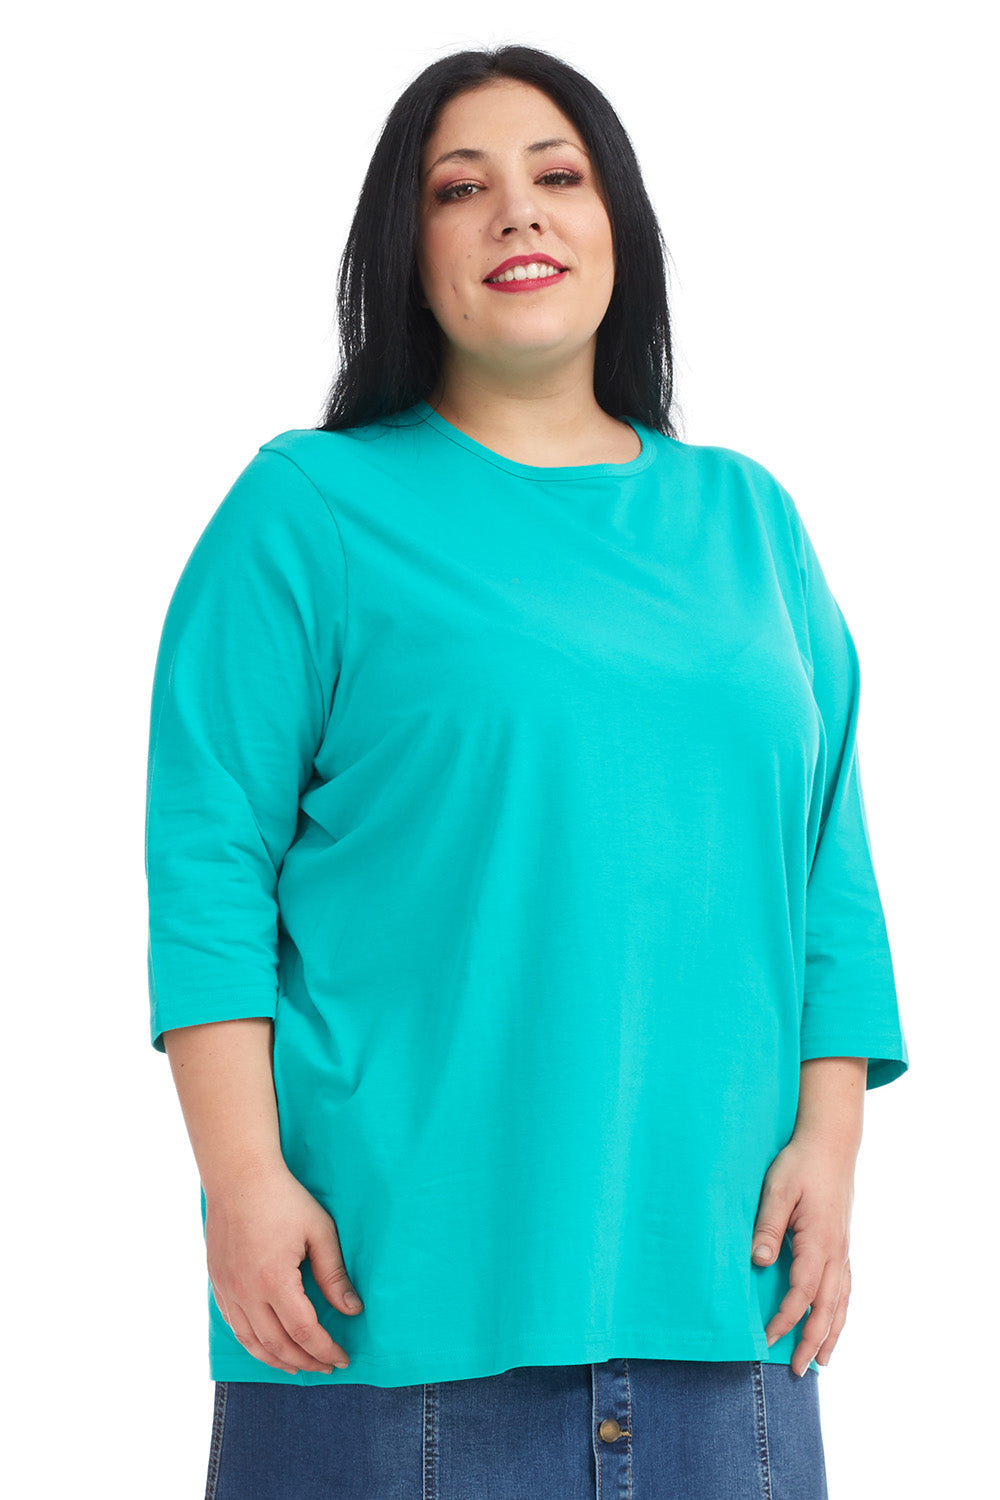 Teal oversized loose comfortable plus size tee for women